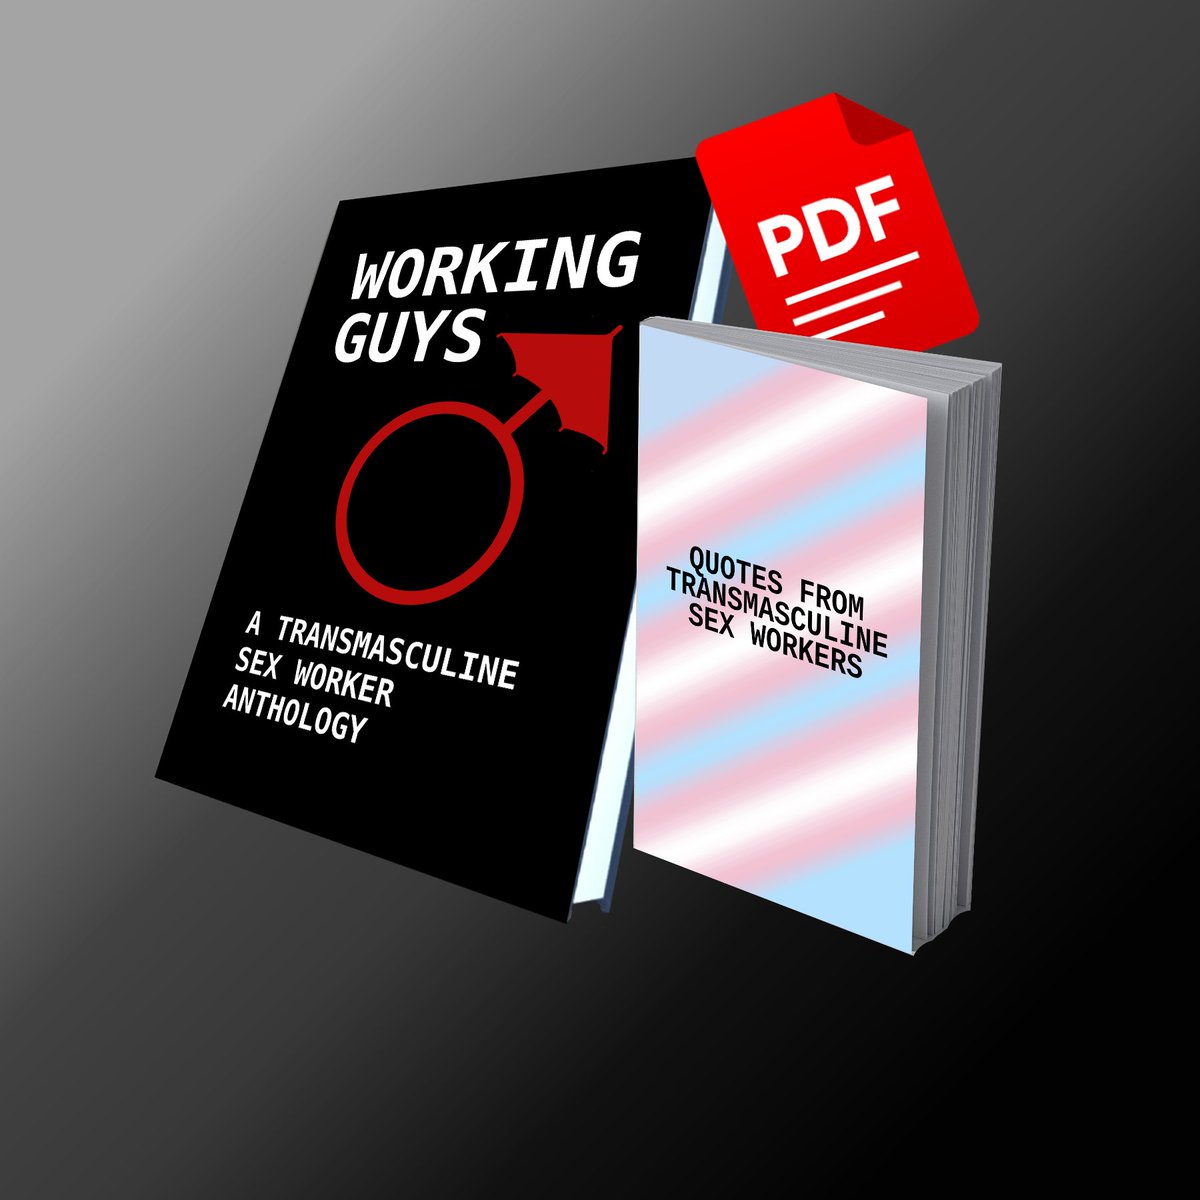 Find out more about Working Guys: A Transmasculine Sex Worker Anthology here: workingguys.carrd.co Please sign up to be notified when the Kickstarter goes live. It really helps with the algorithm and makes the project more likely to get funded! kickstarter.com/projects/mxjac…